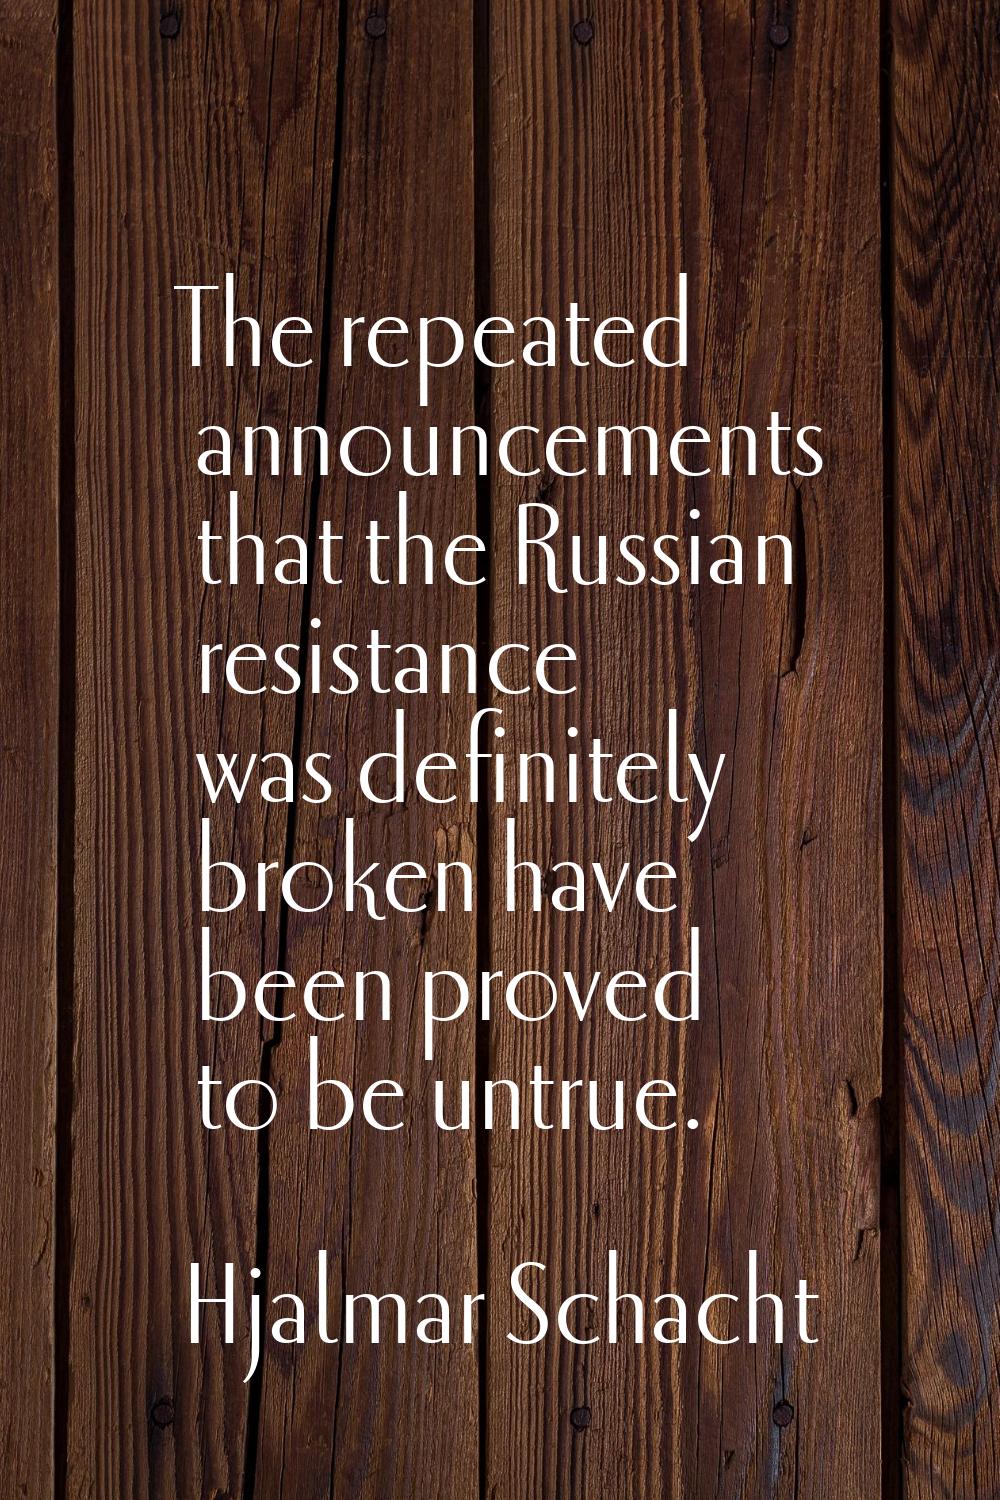 The repeated announcements that the Russian resistance was definitely broken have been proved to be